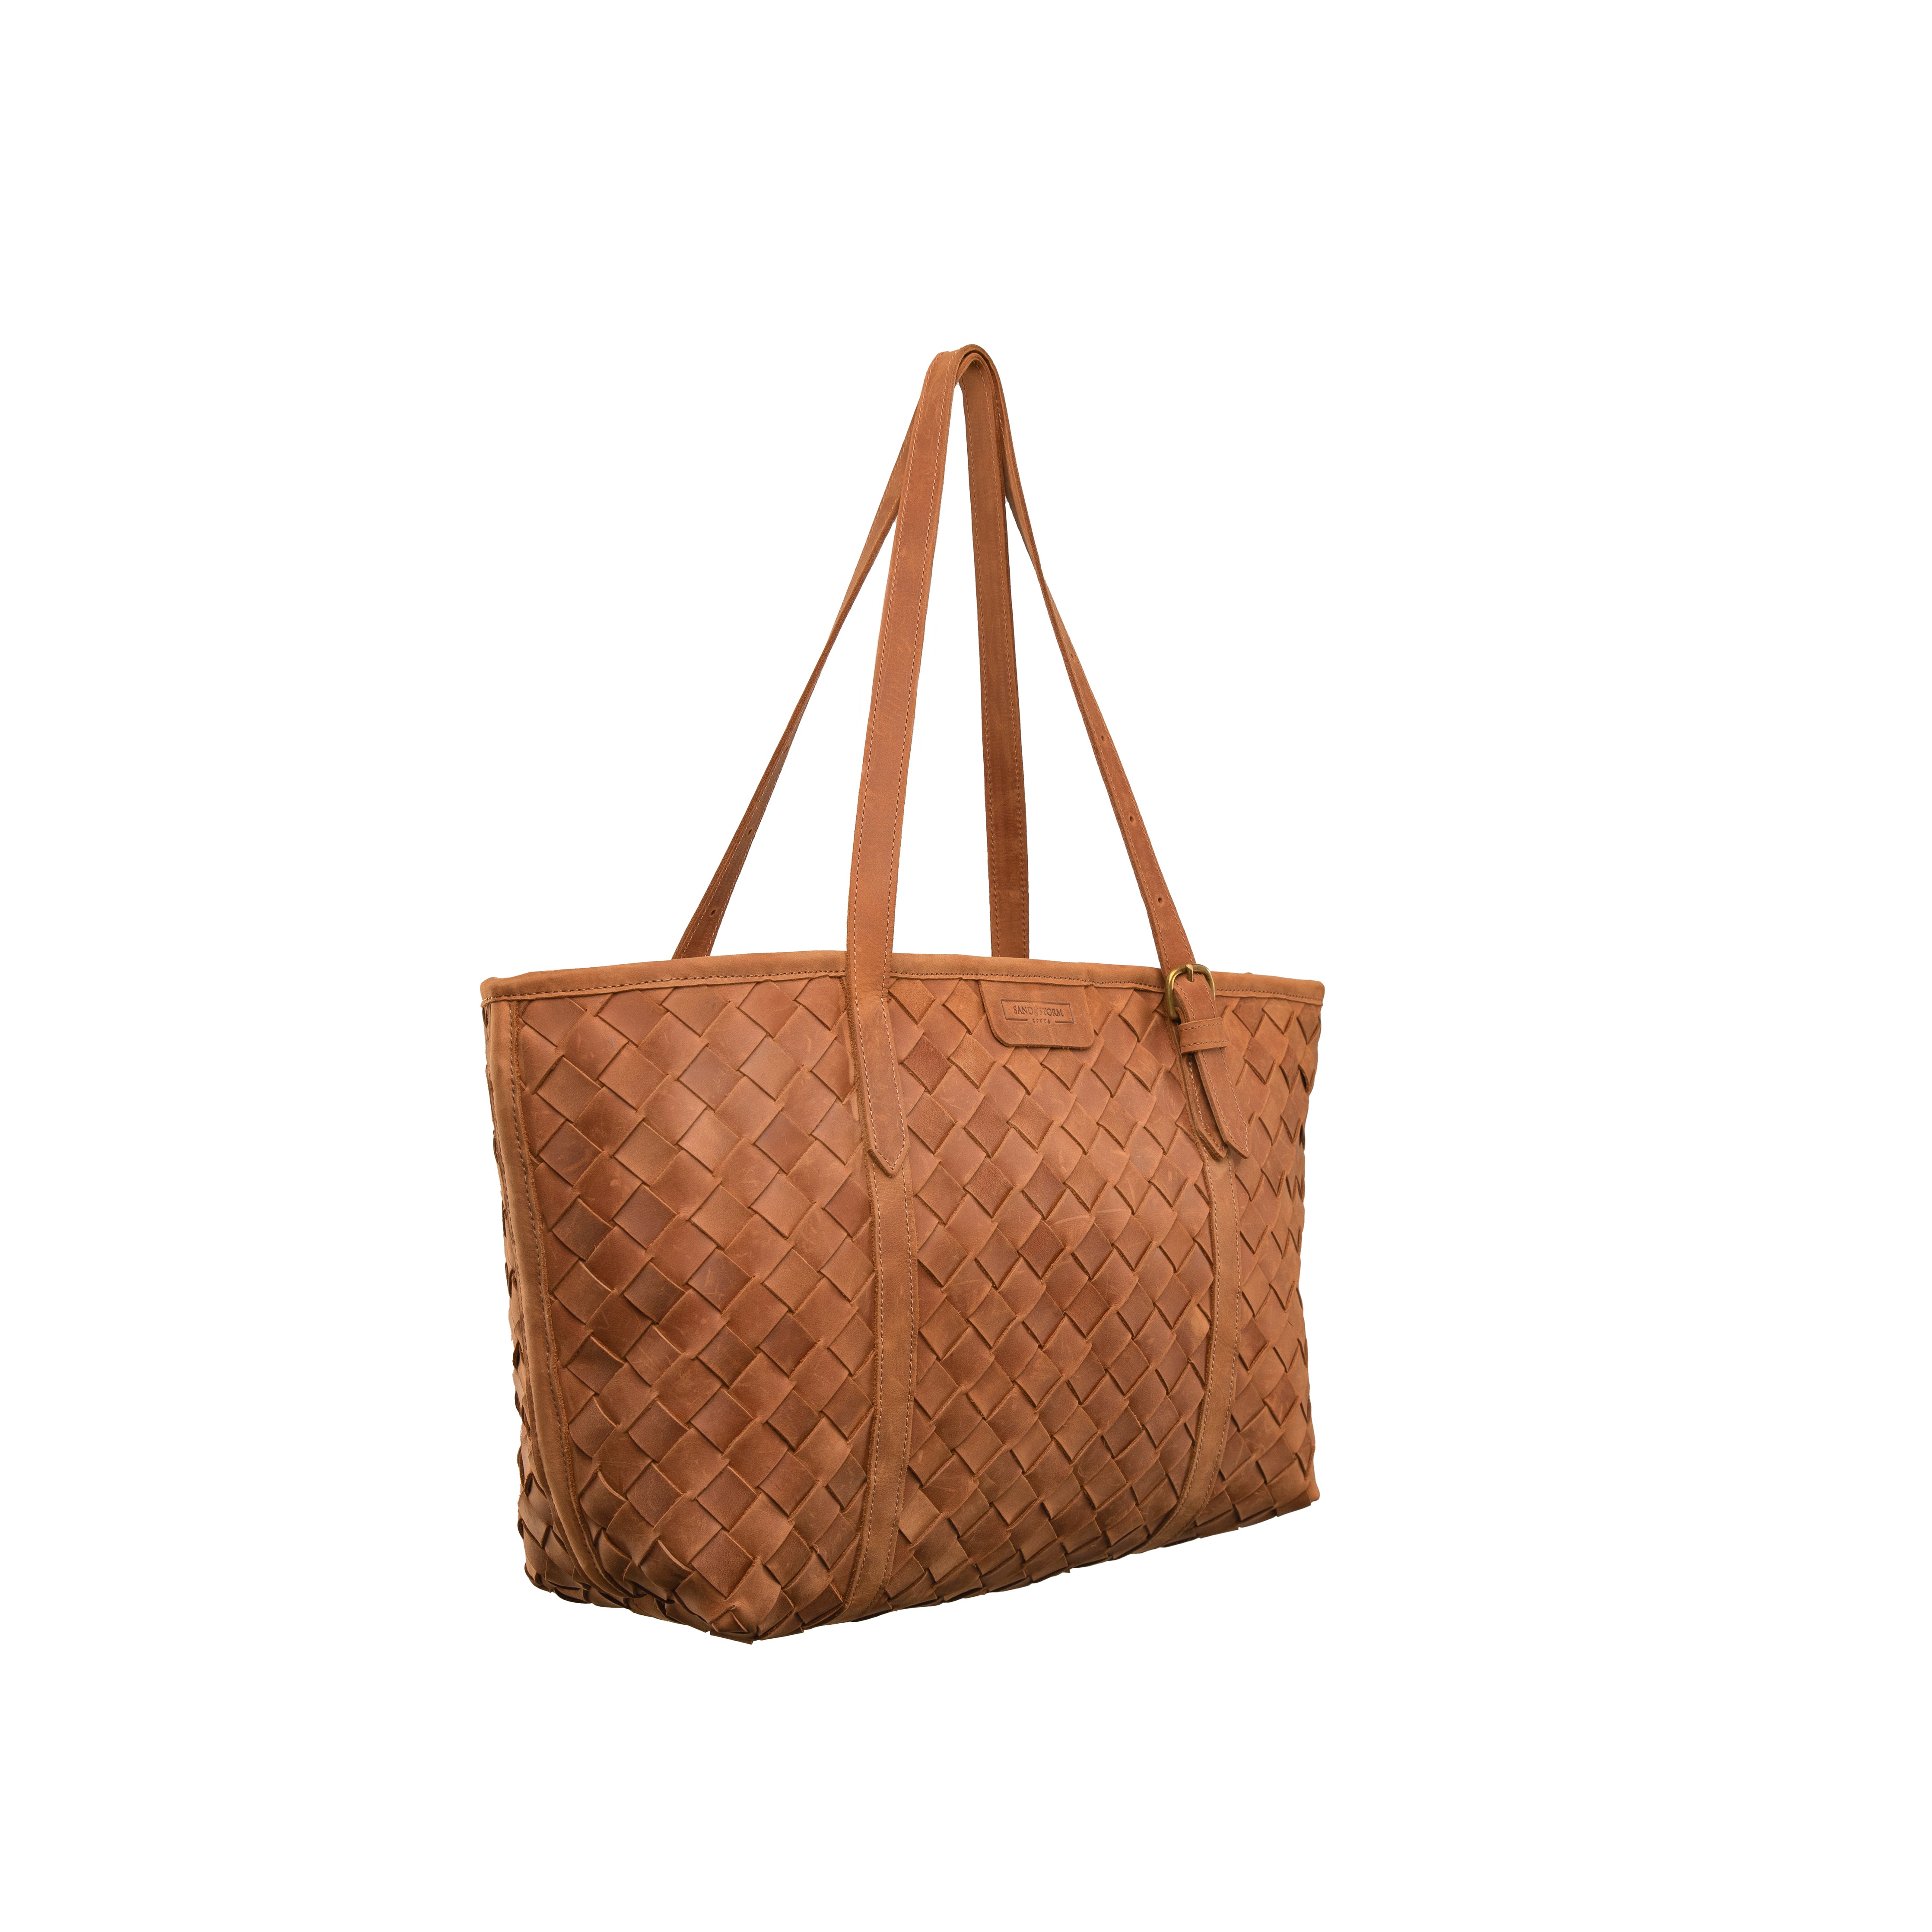 Pull-up Leather Weaved Tote